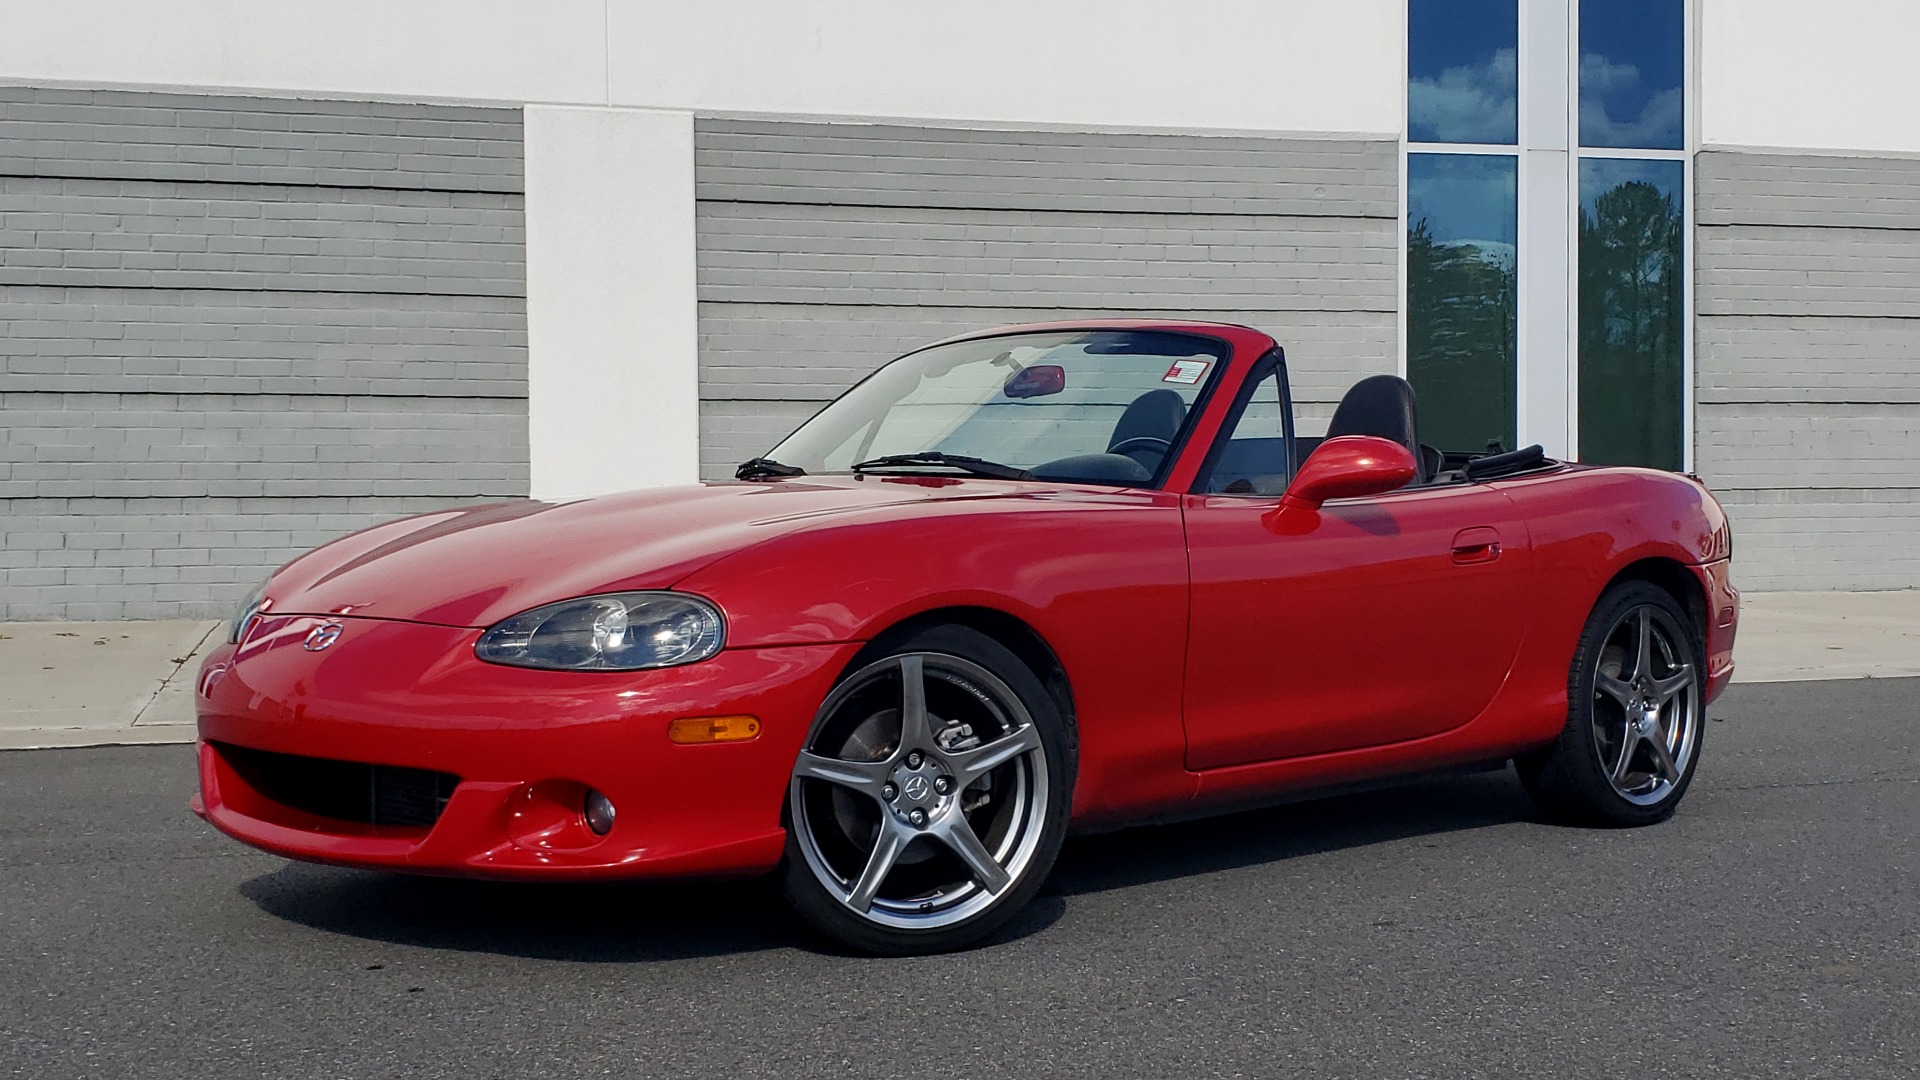 Used 2004 Mazda MX-5 MIATA 2DR CONVERTIBLE MAZDASPEED / GRAND TOURING PKG for sale Sold at Formula Imports in Charlotte NC 28227 1